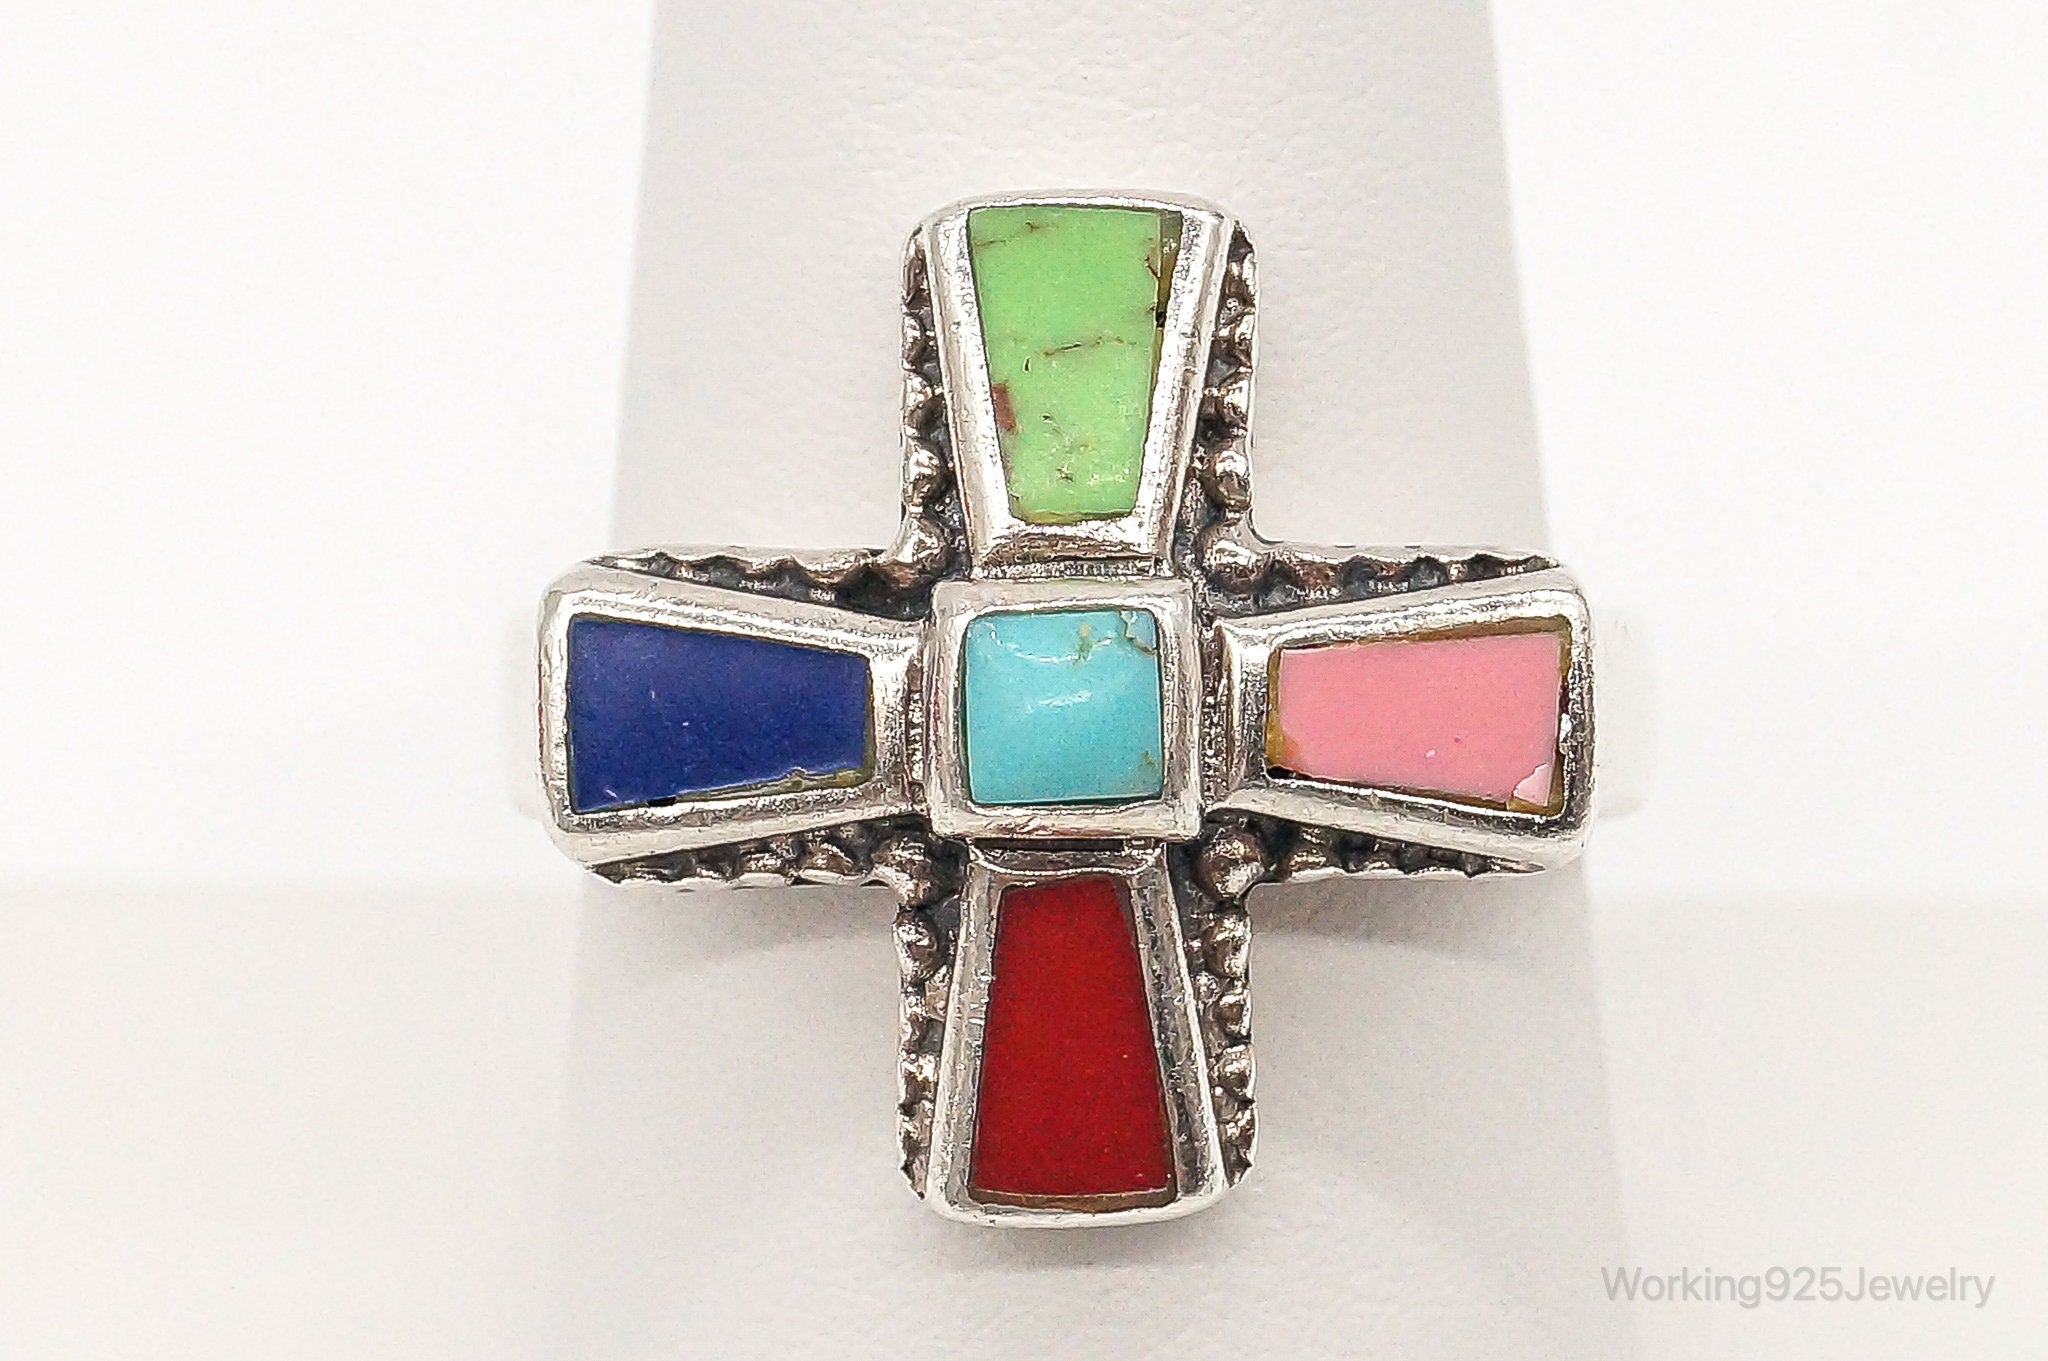 Vintage Turquoise Coral Lapis Lazuli Sterling Silver Ring - Size 8